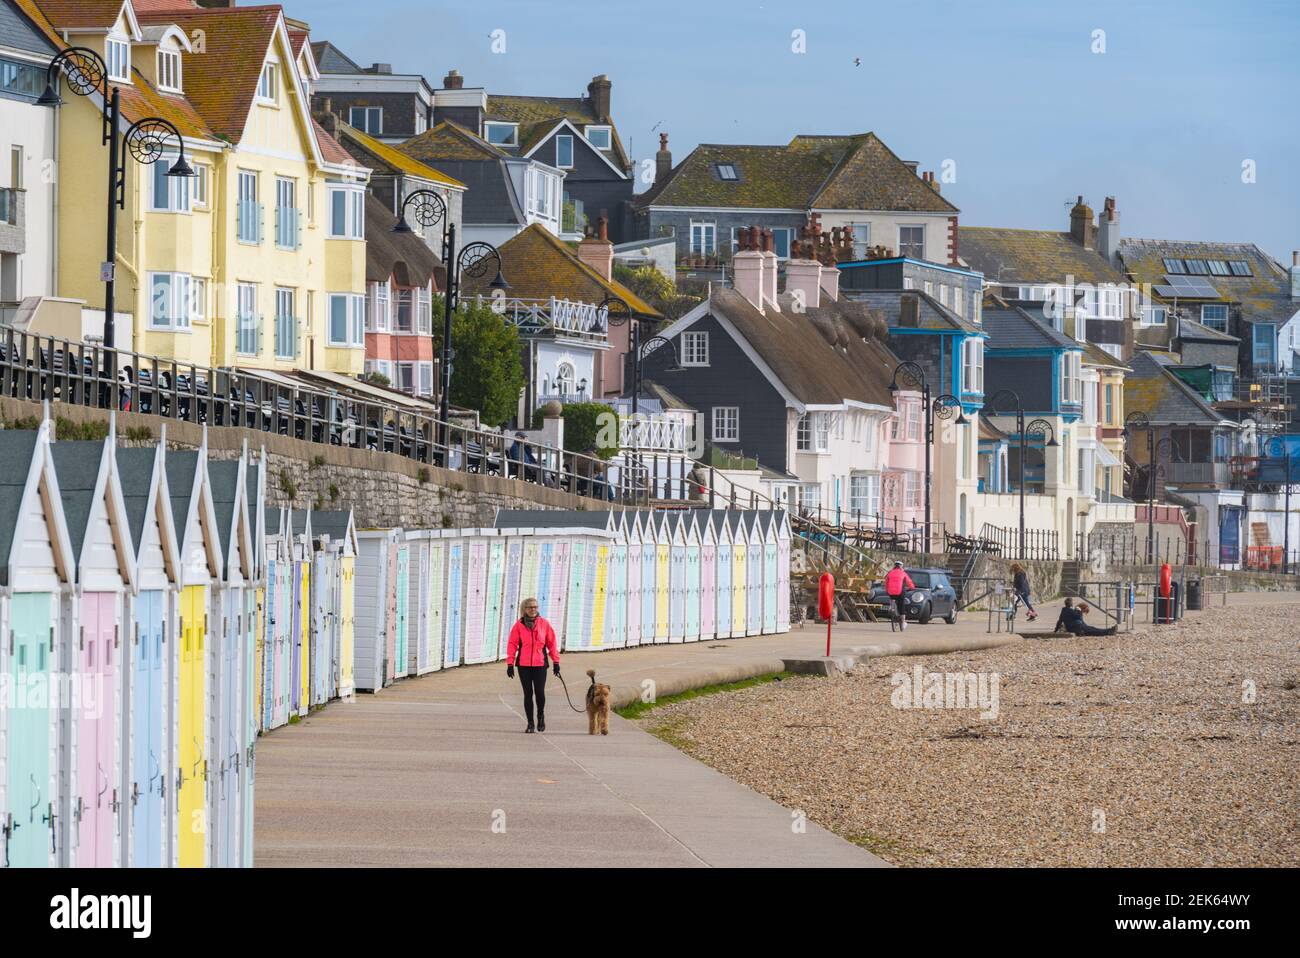 Lyme Regis, Dorset, UK. 23rd Feb, 2021. UK Weather: Locals enjoy the spring sunshine and bright blue skies on a breezy morning at Lyme Regis. Businesses in the town are looking forward to the gradual lifting of the lockdown in time for the summer season. Credit: Celia McMahon/Alamy Live News Stock Photo